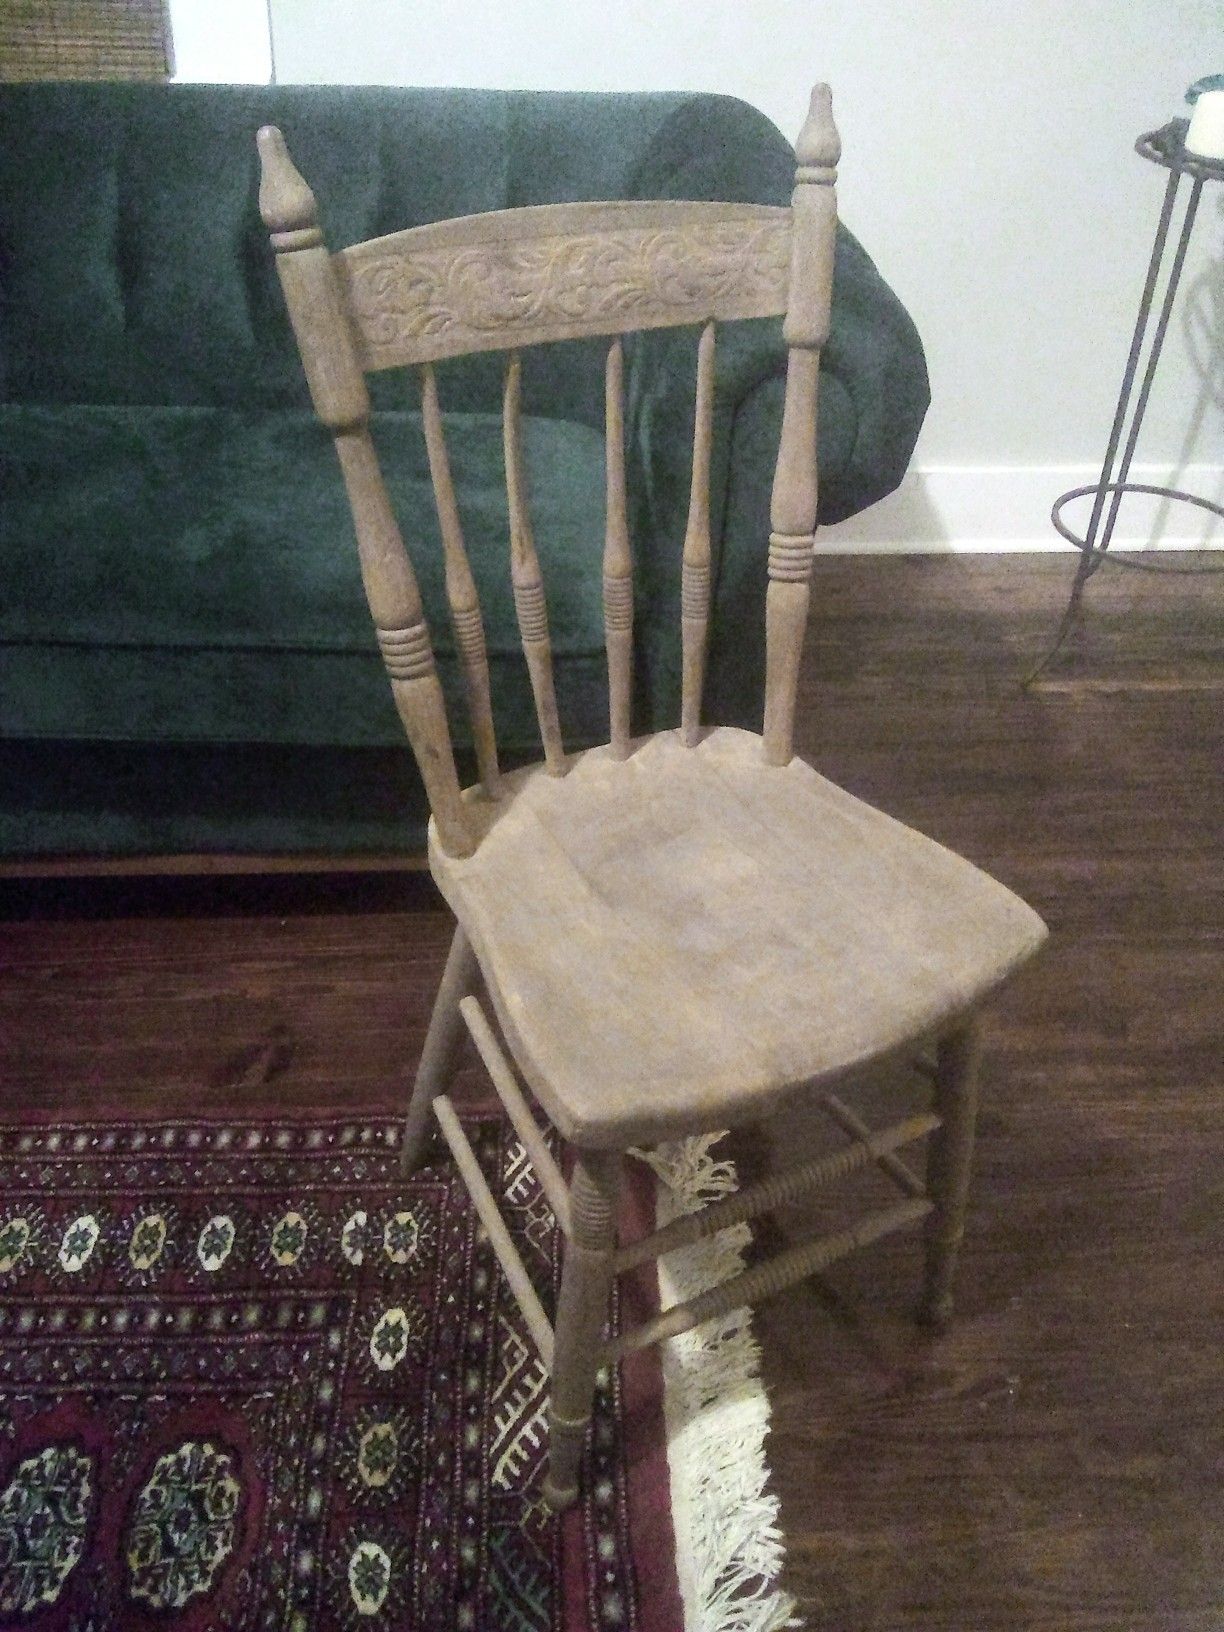 Antique Victorian chair -- handmade, stripped and weathered